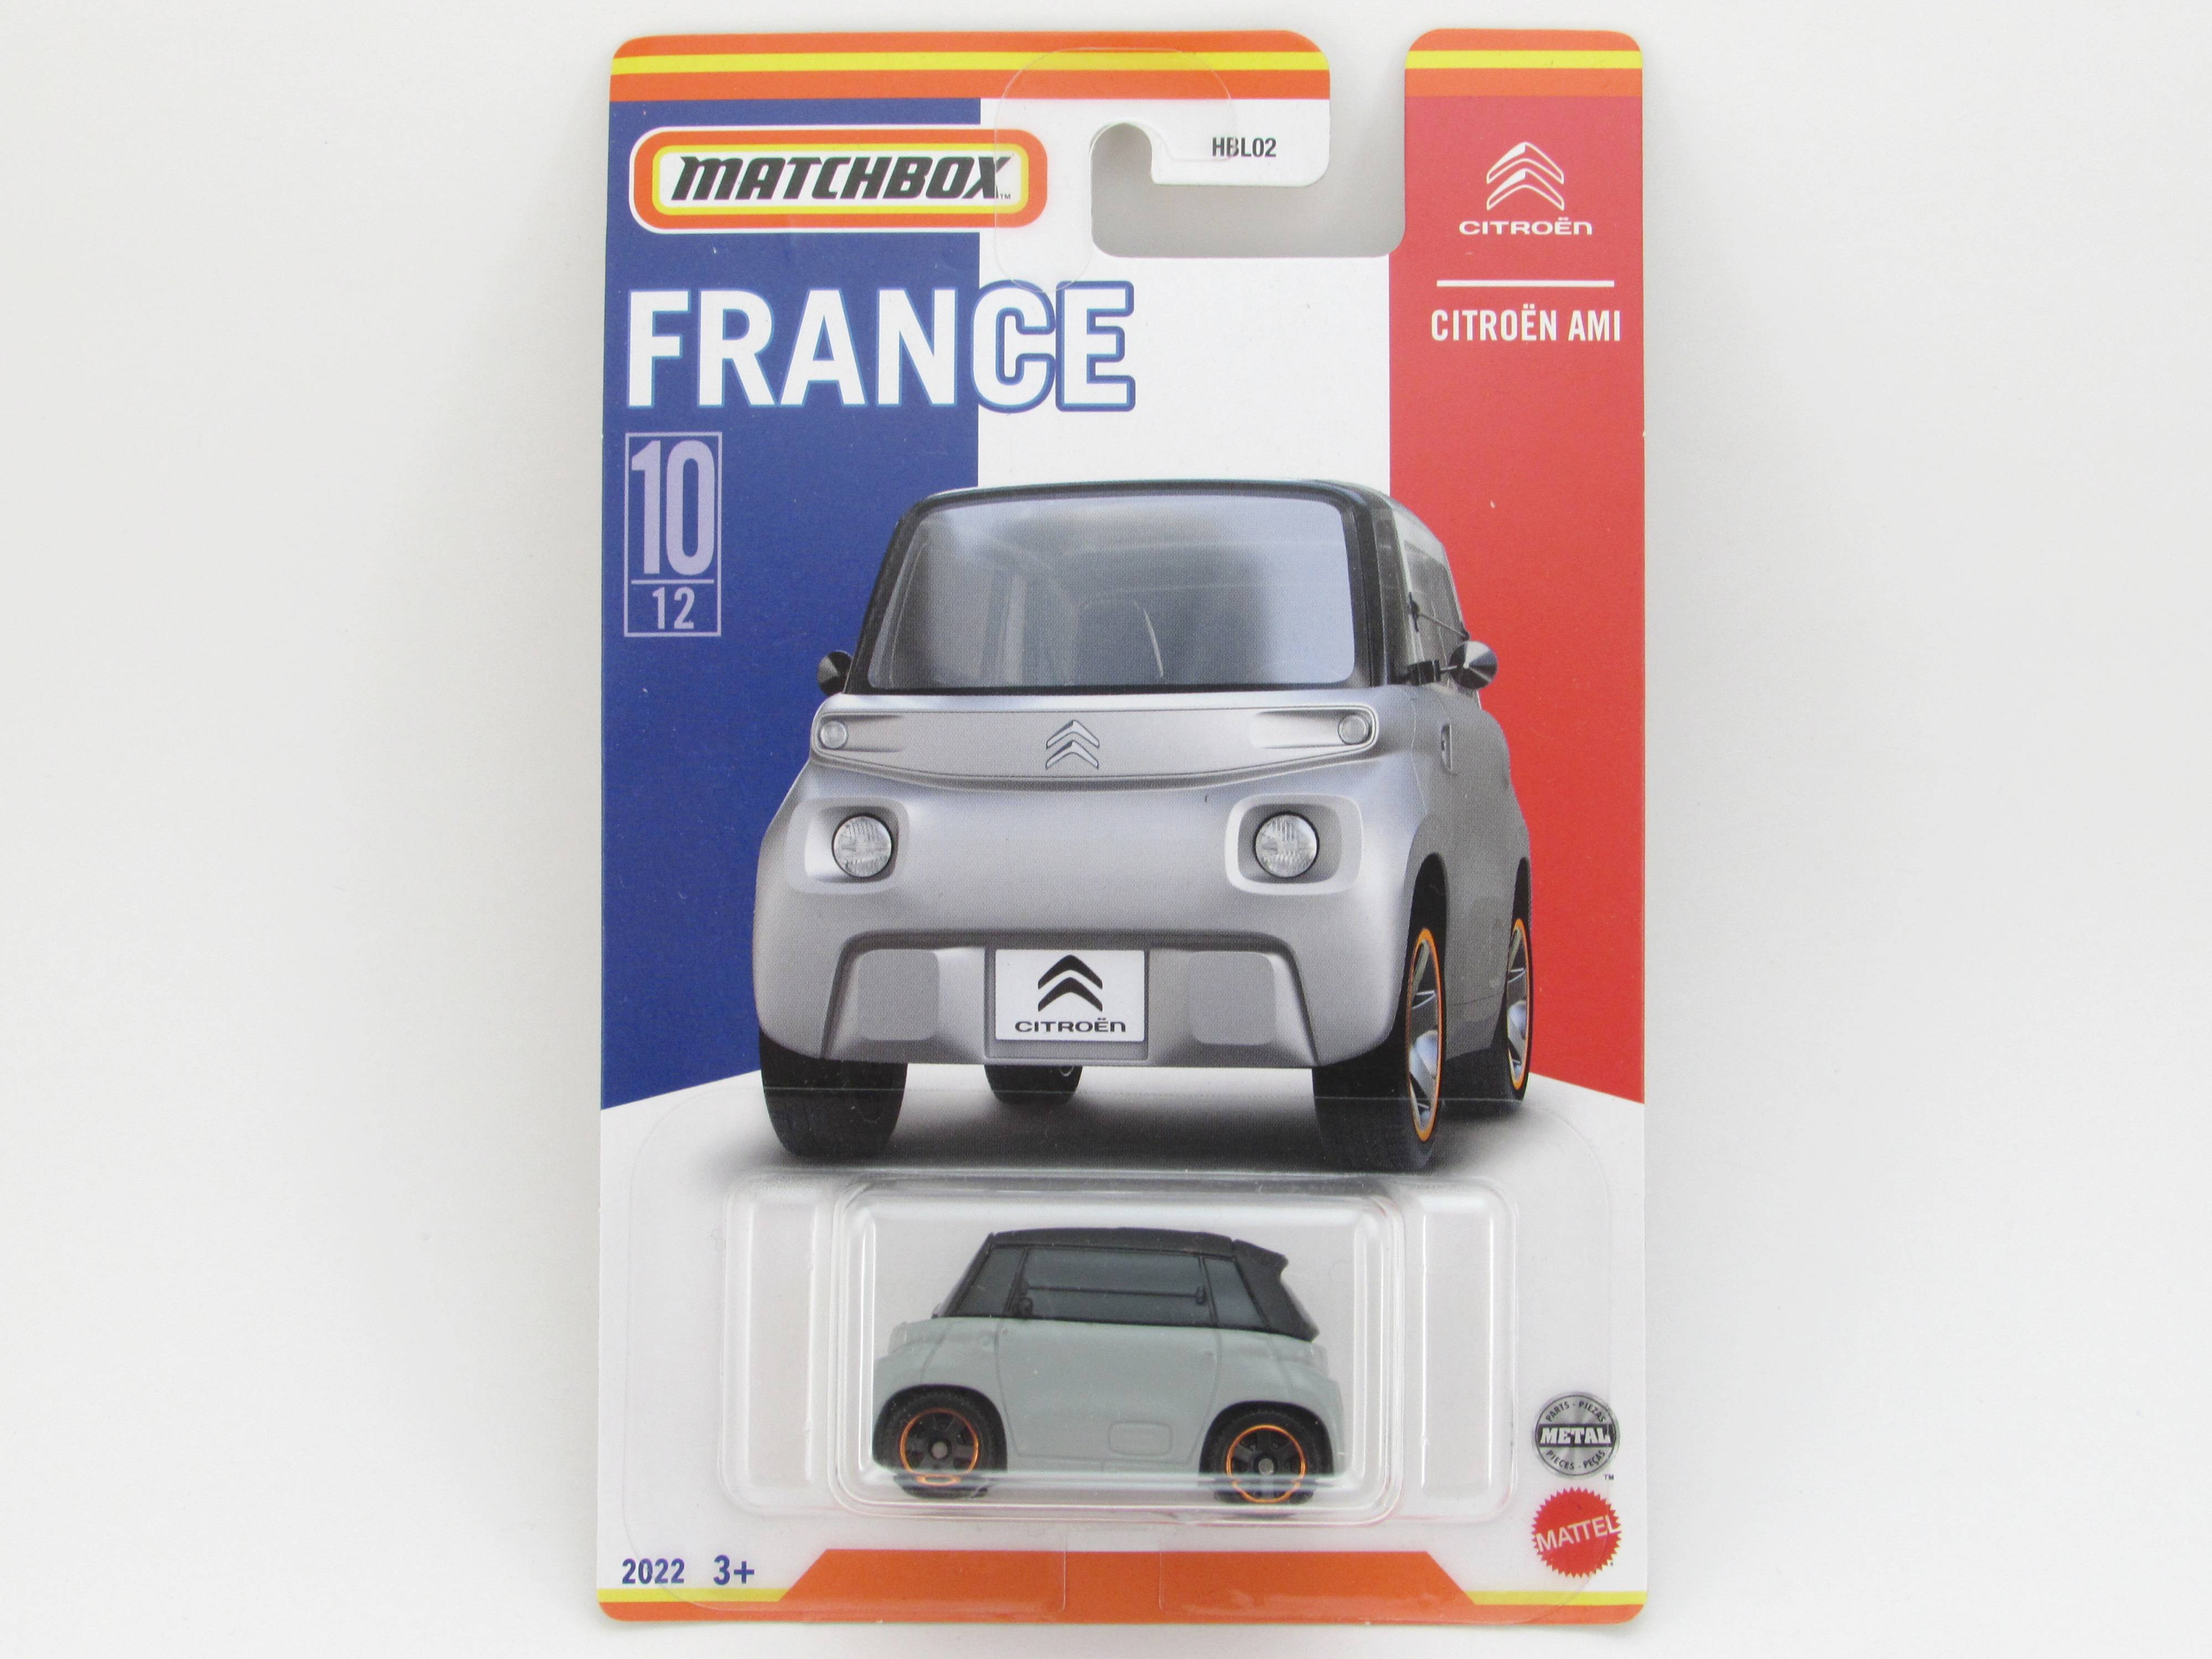 Matchbox Monday continues it's world trip, hitting France – Wheelcollectors